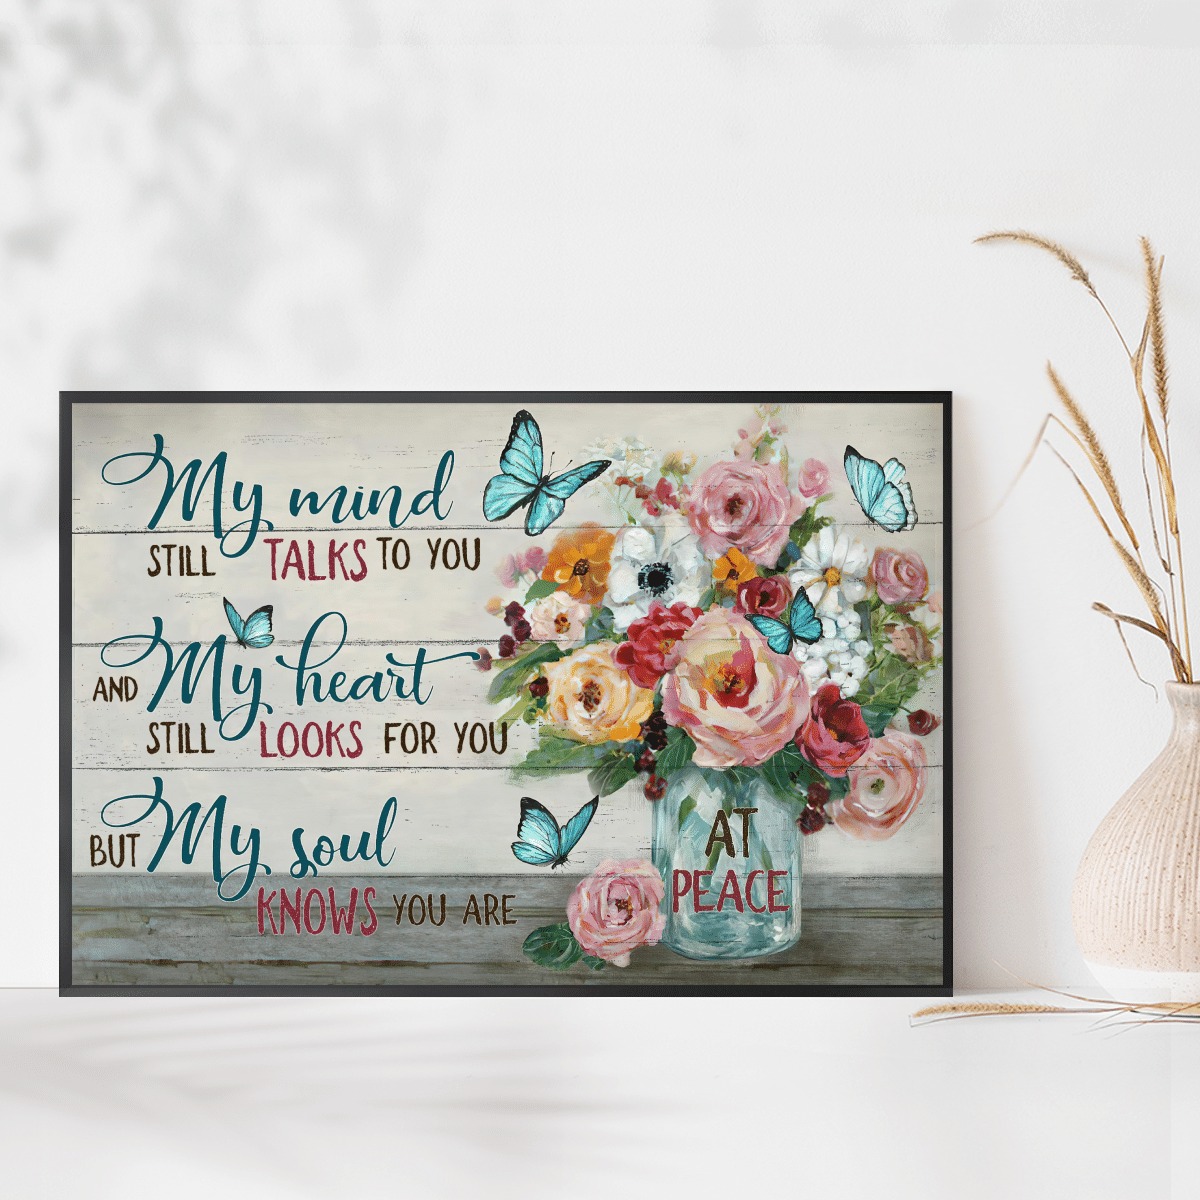 Jesus Flower vase My mind still talks to you at peace poster, canvas 8